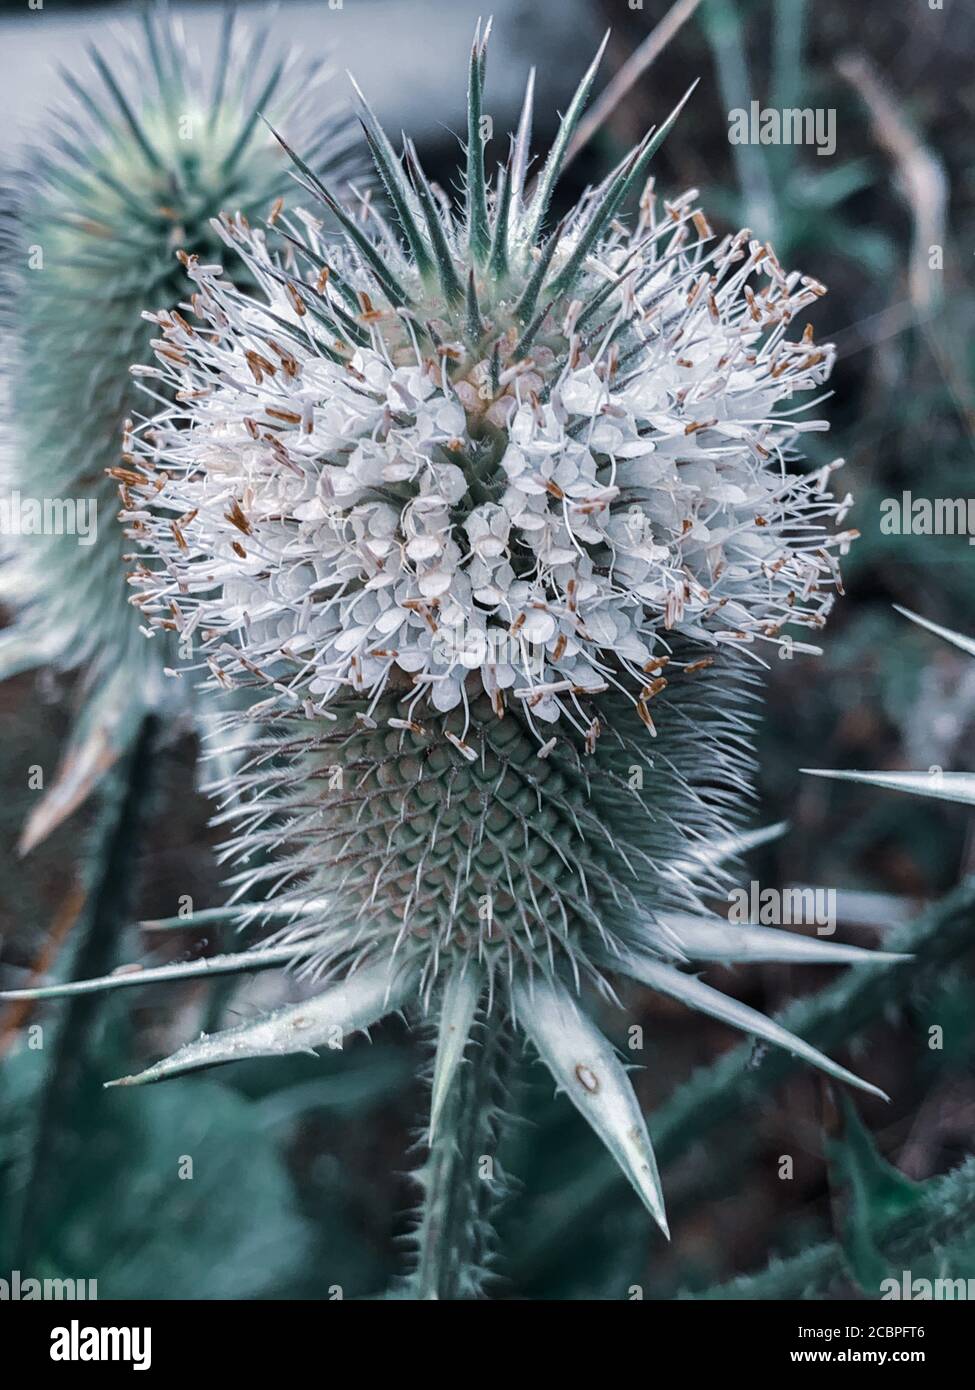 Vertical closeup shot of a blooming cutleaf teasel plant Stock Photo